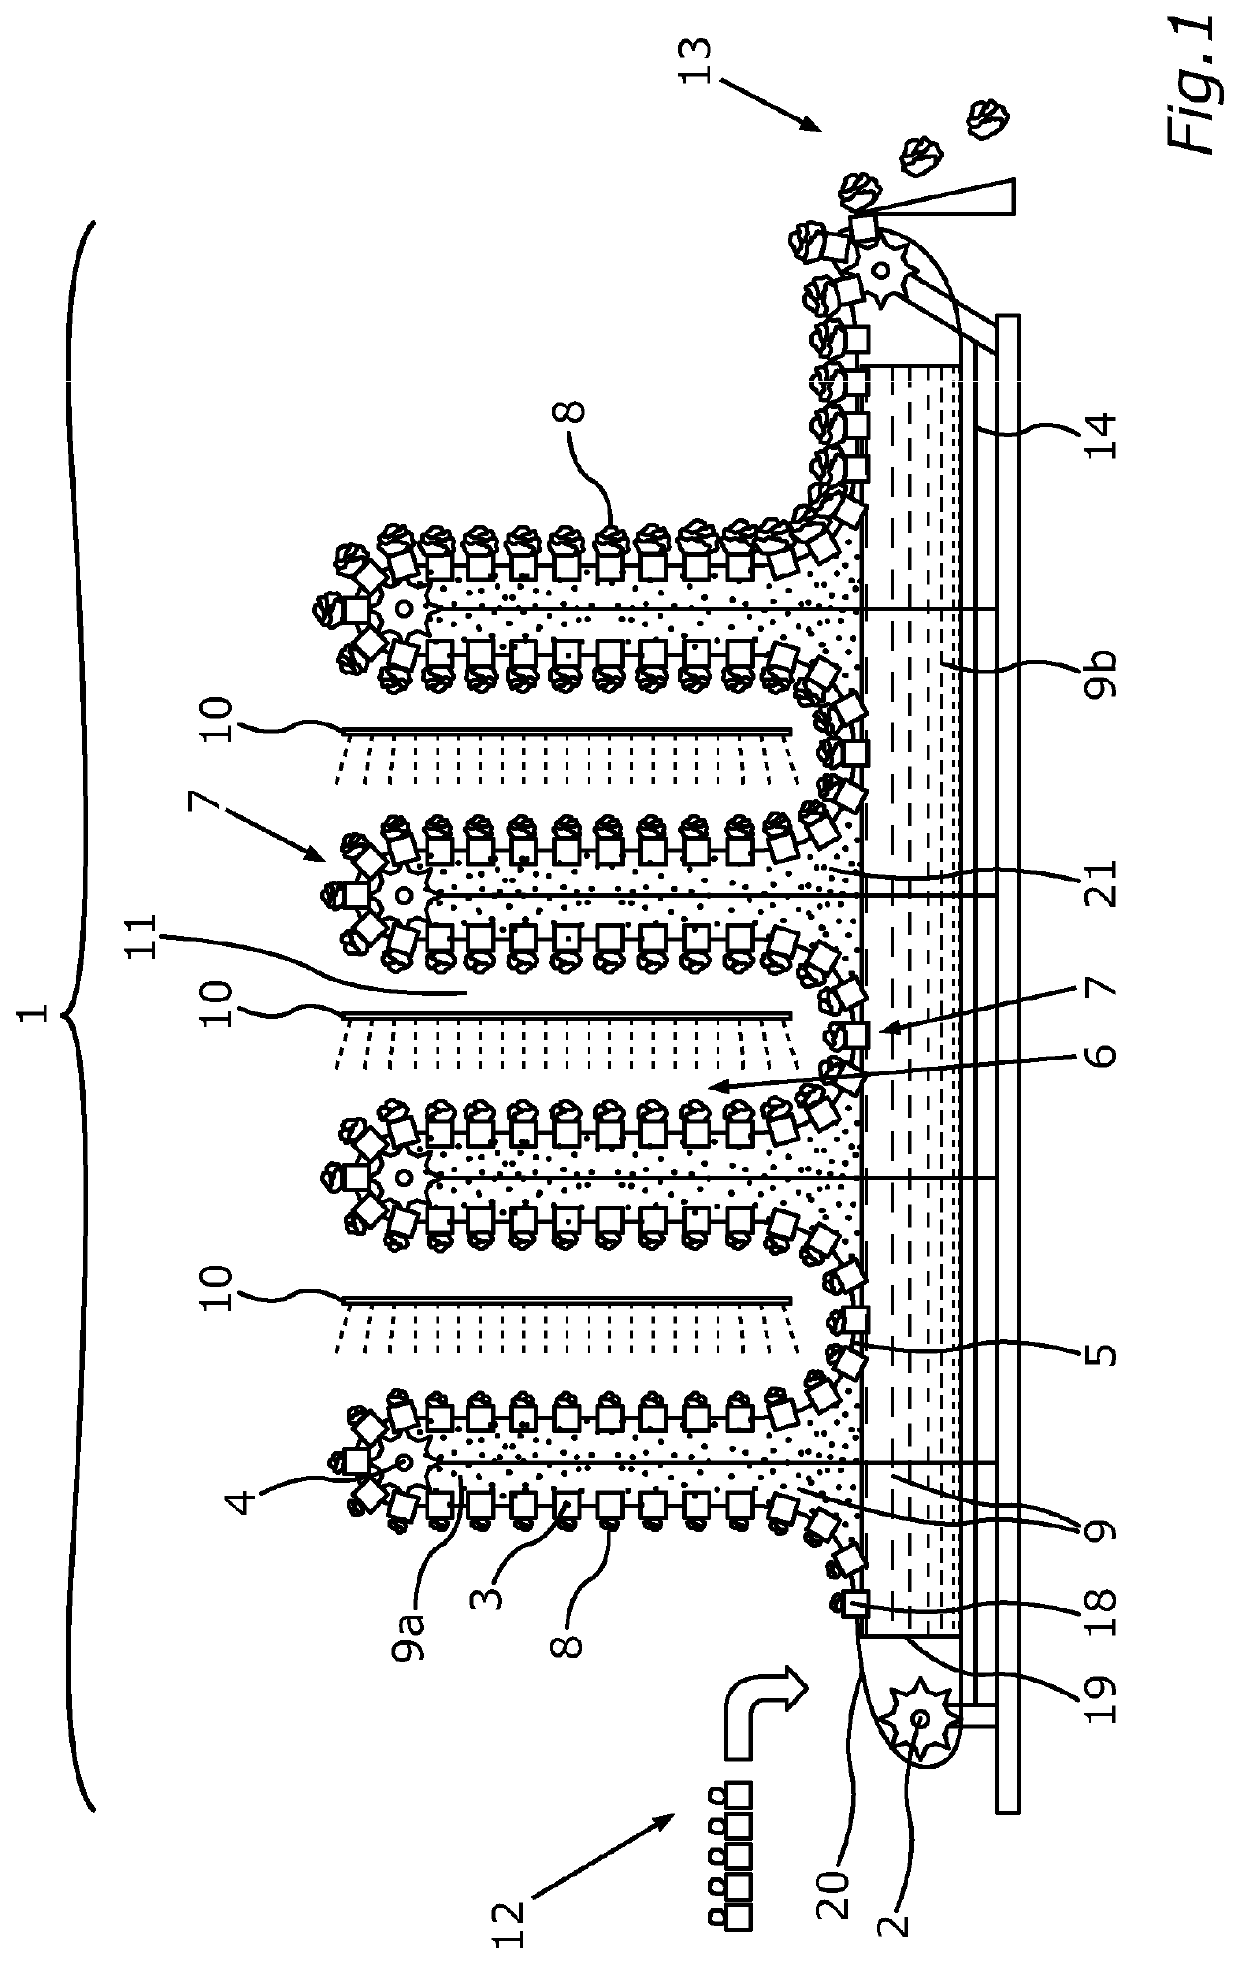 Device for promoting the growth of plants